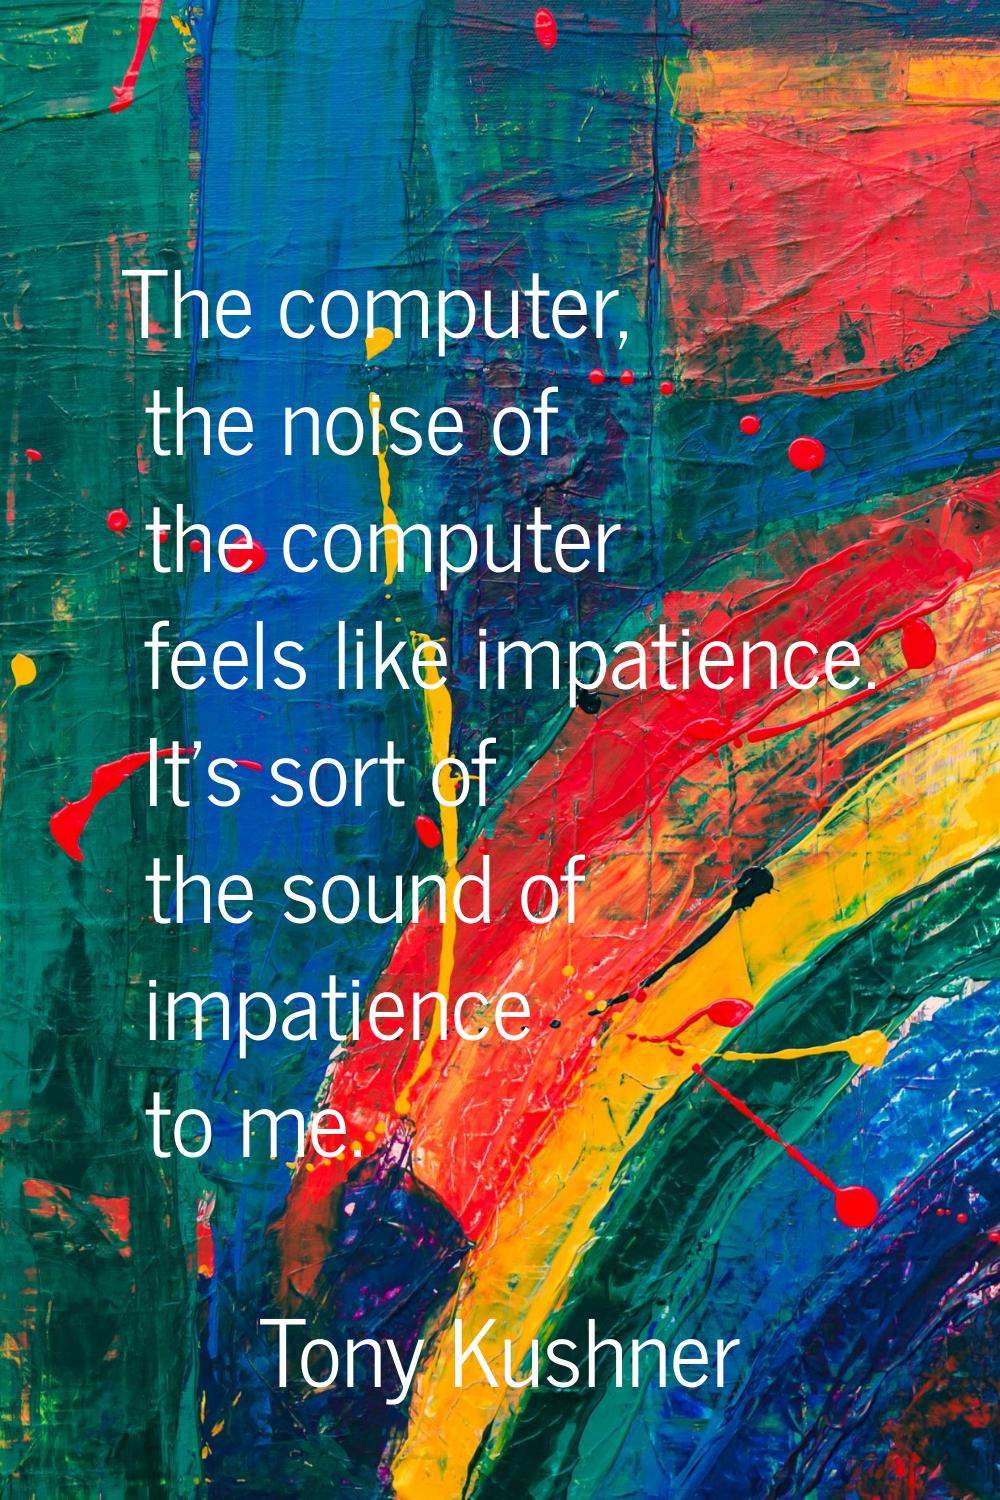 The computer, the noise of the computer feels like impatience. It's sort of the sound of impatience